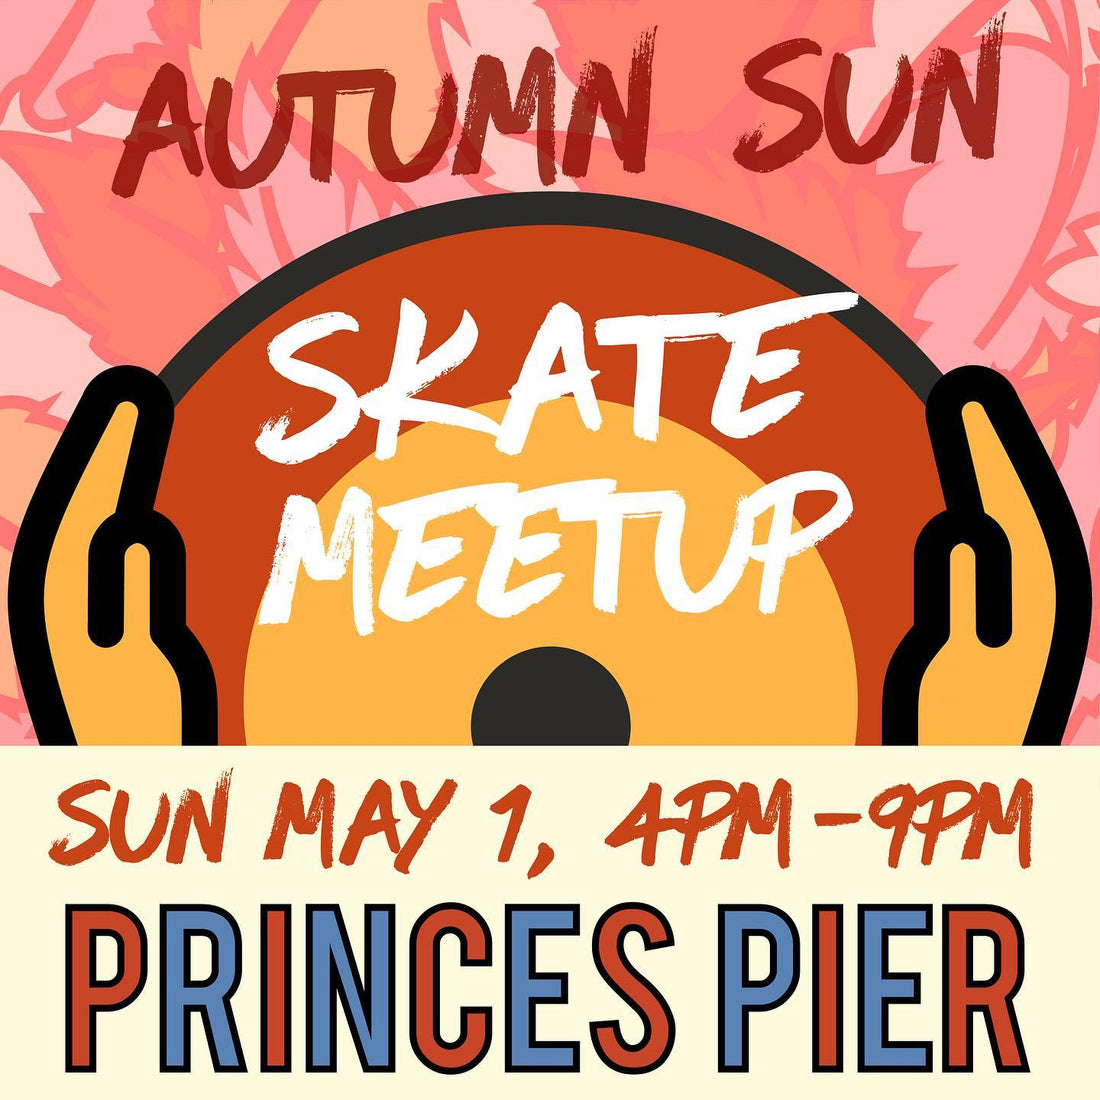 What's Coming Up: Princes Pier Skate Meetup